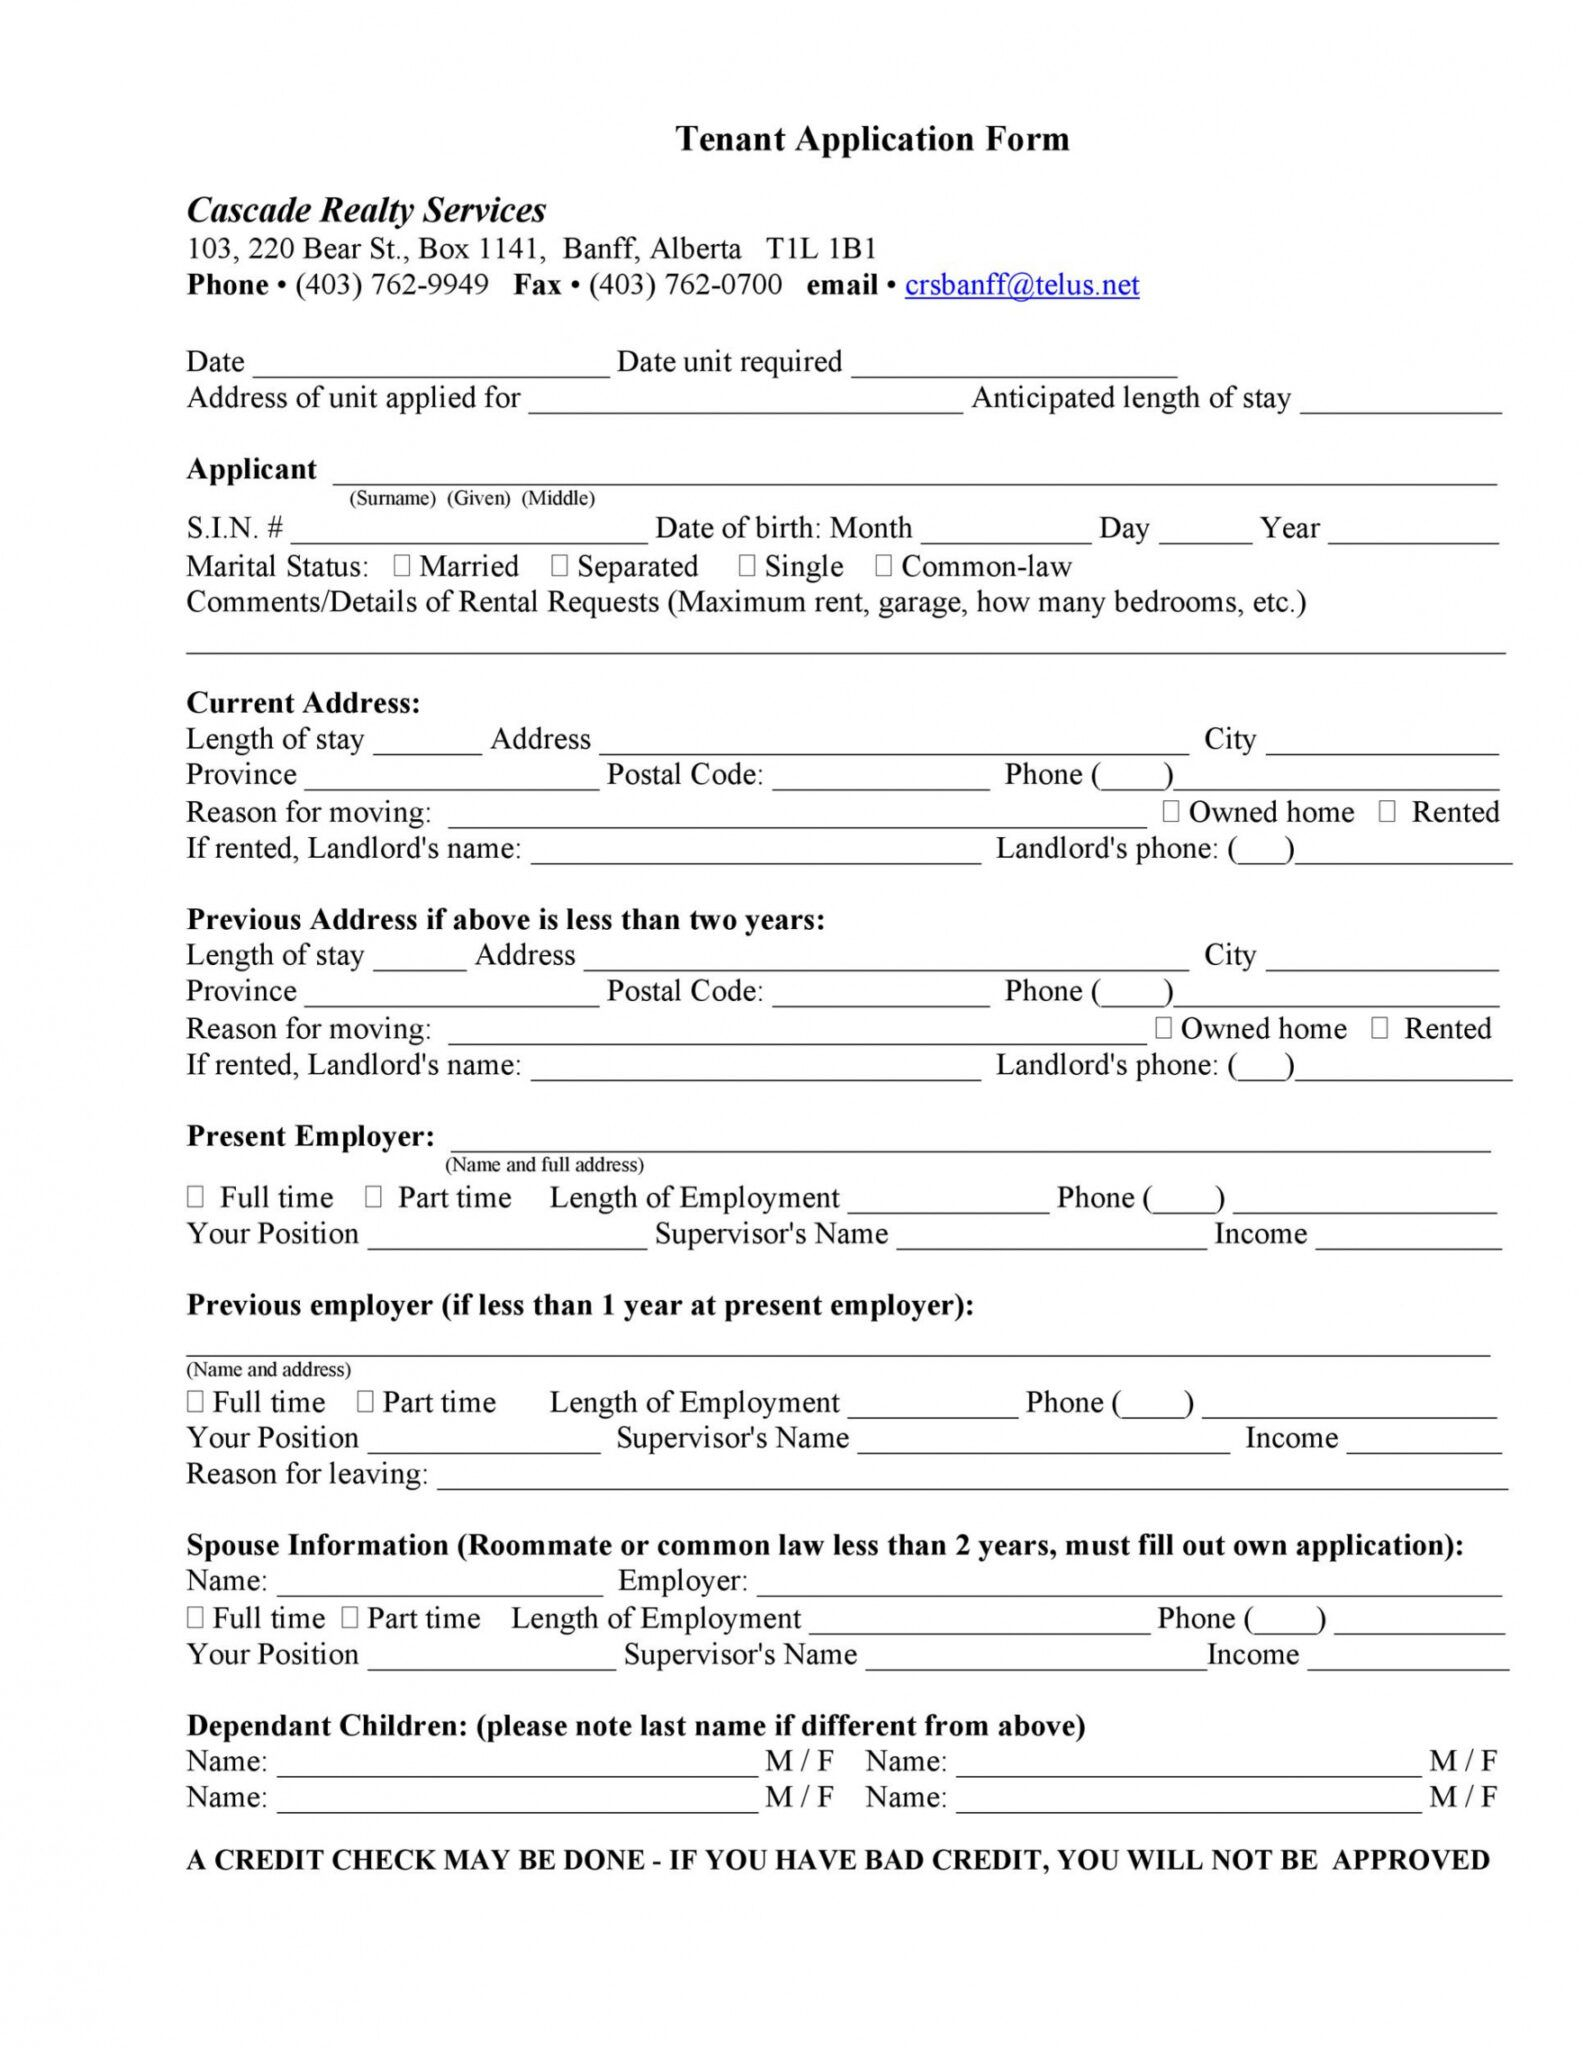 forms-of-id-for-rental-application-2022-rentalapplicationform